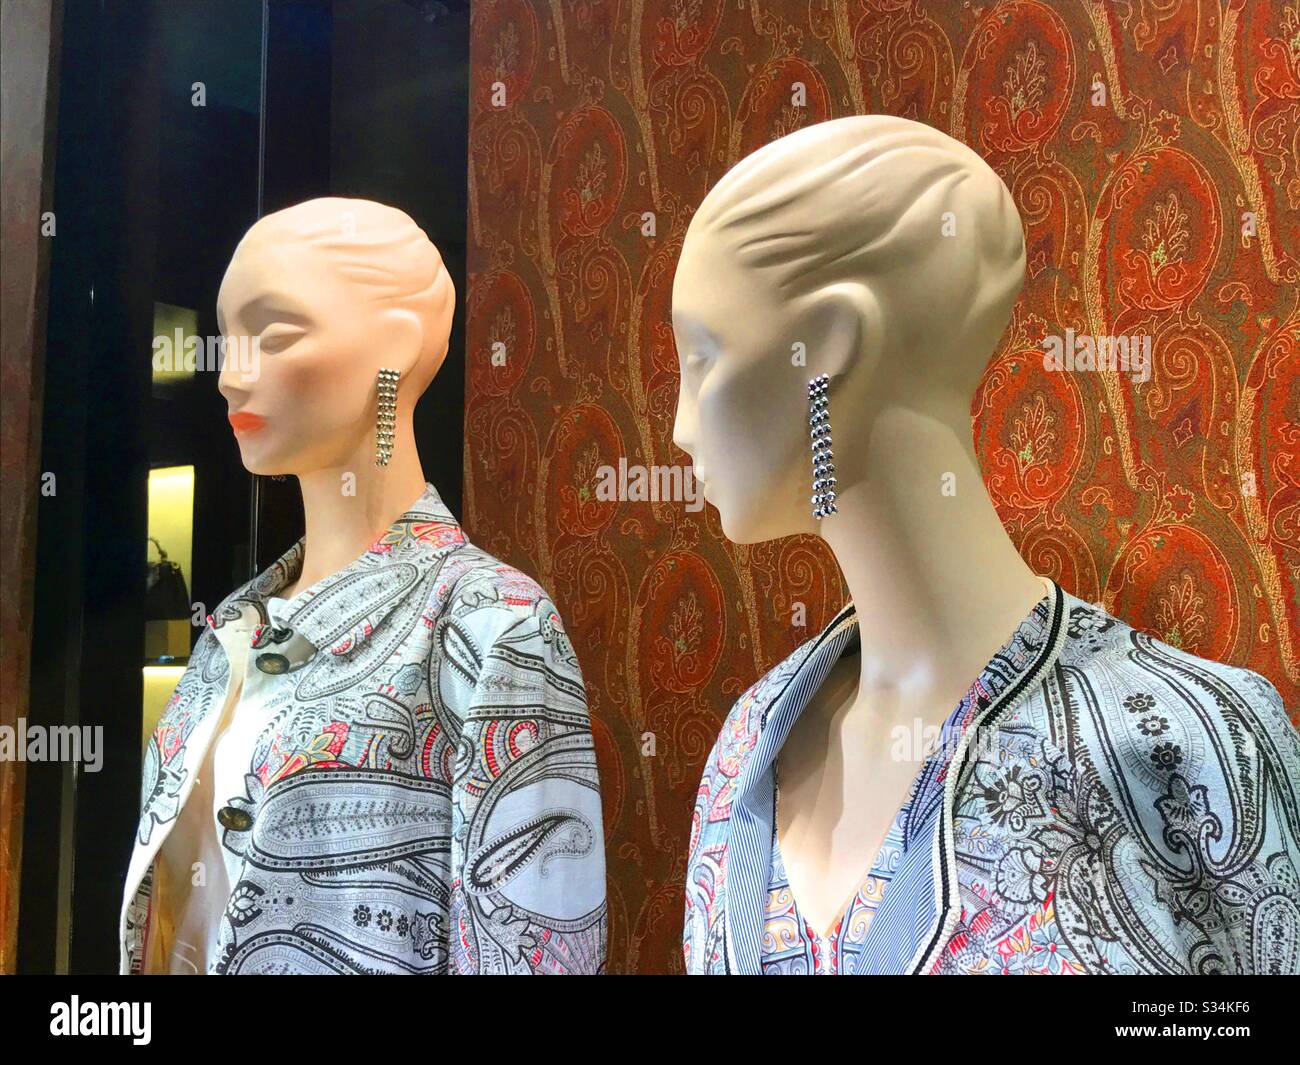 Two mannequins in a shop window Stock Photo - Alamy